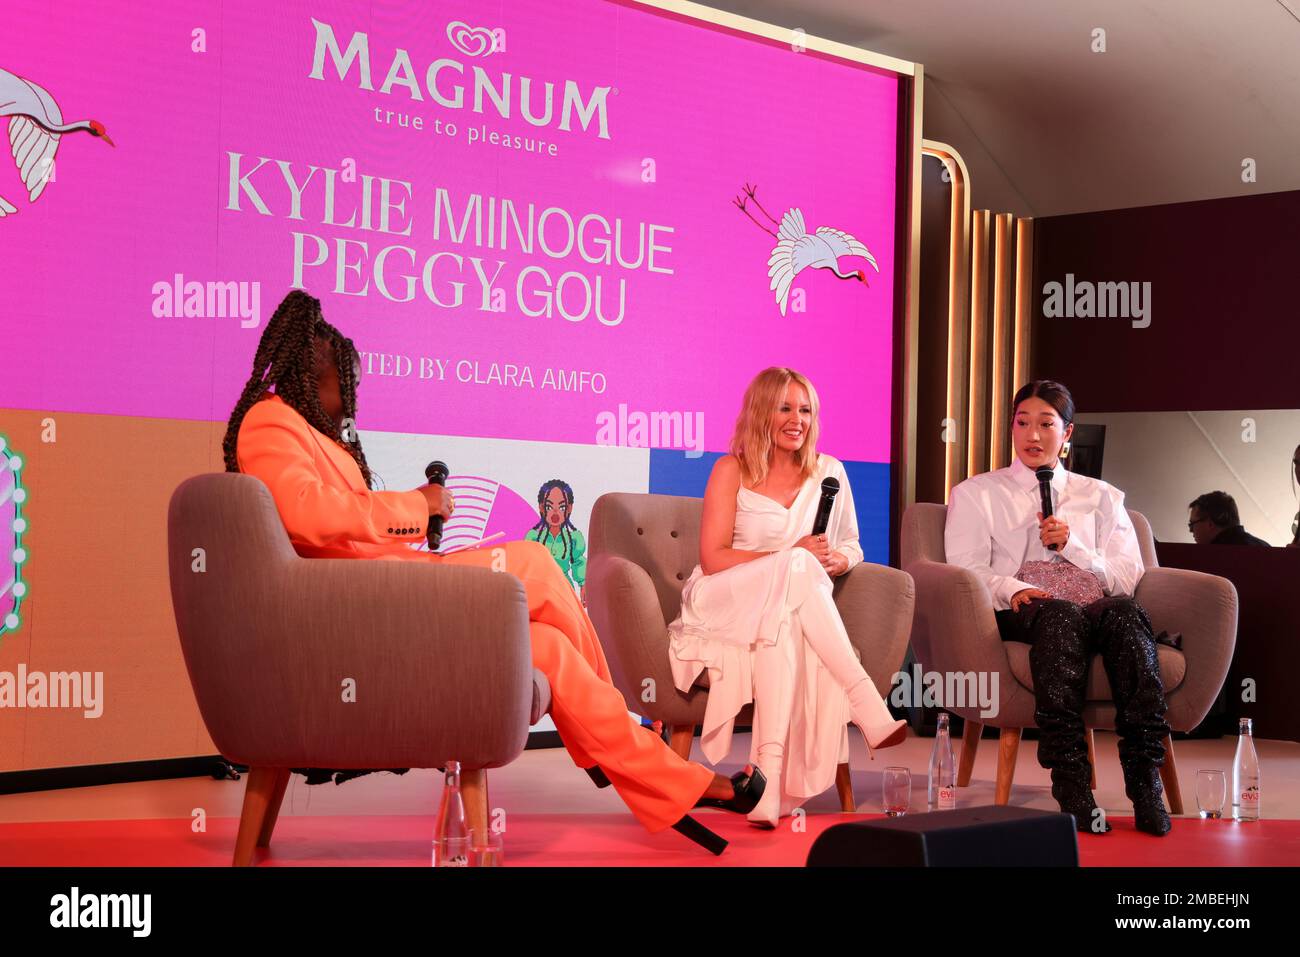 Magnum brought together Kylie Minogue and Peggy Gou to create the